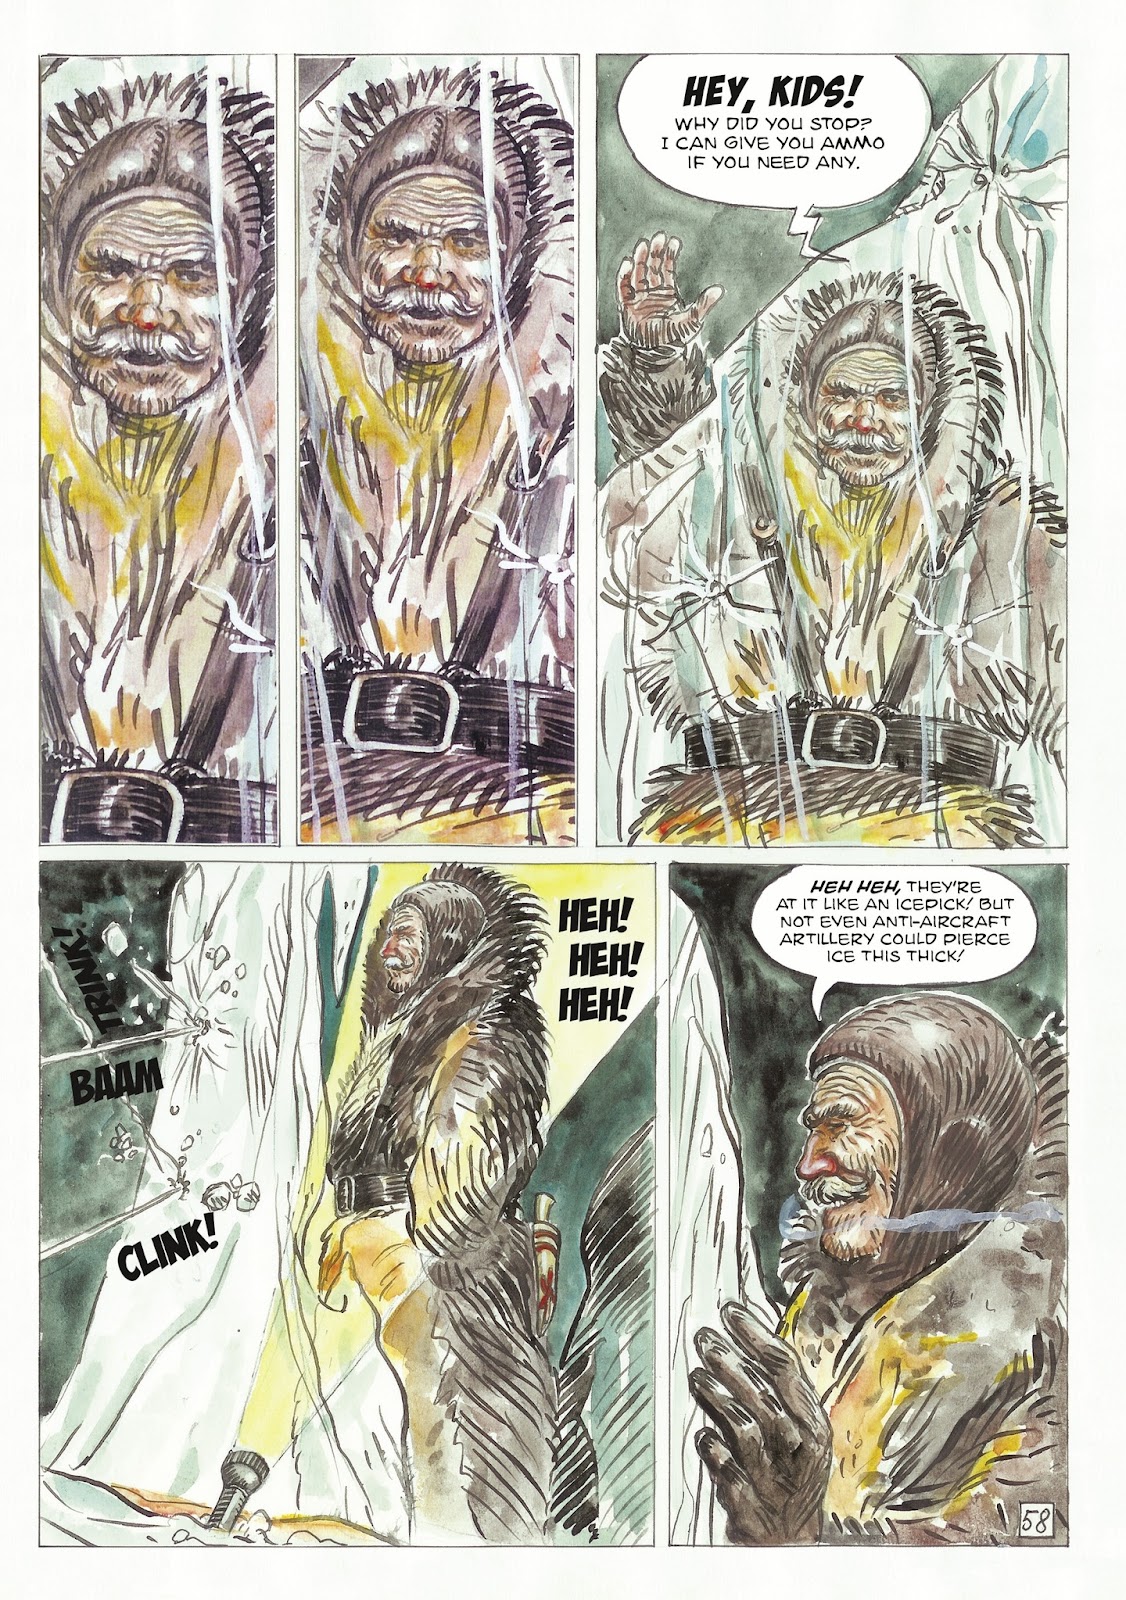 The Man With the Bear issue 2 - Page 4